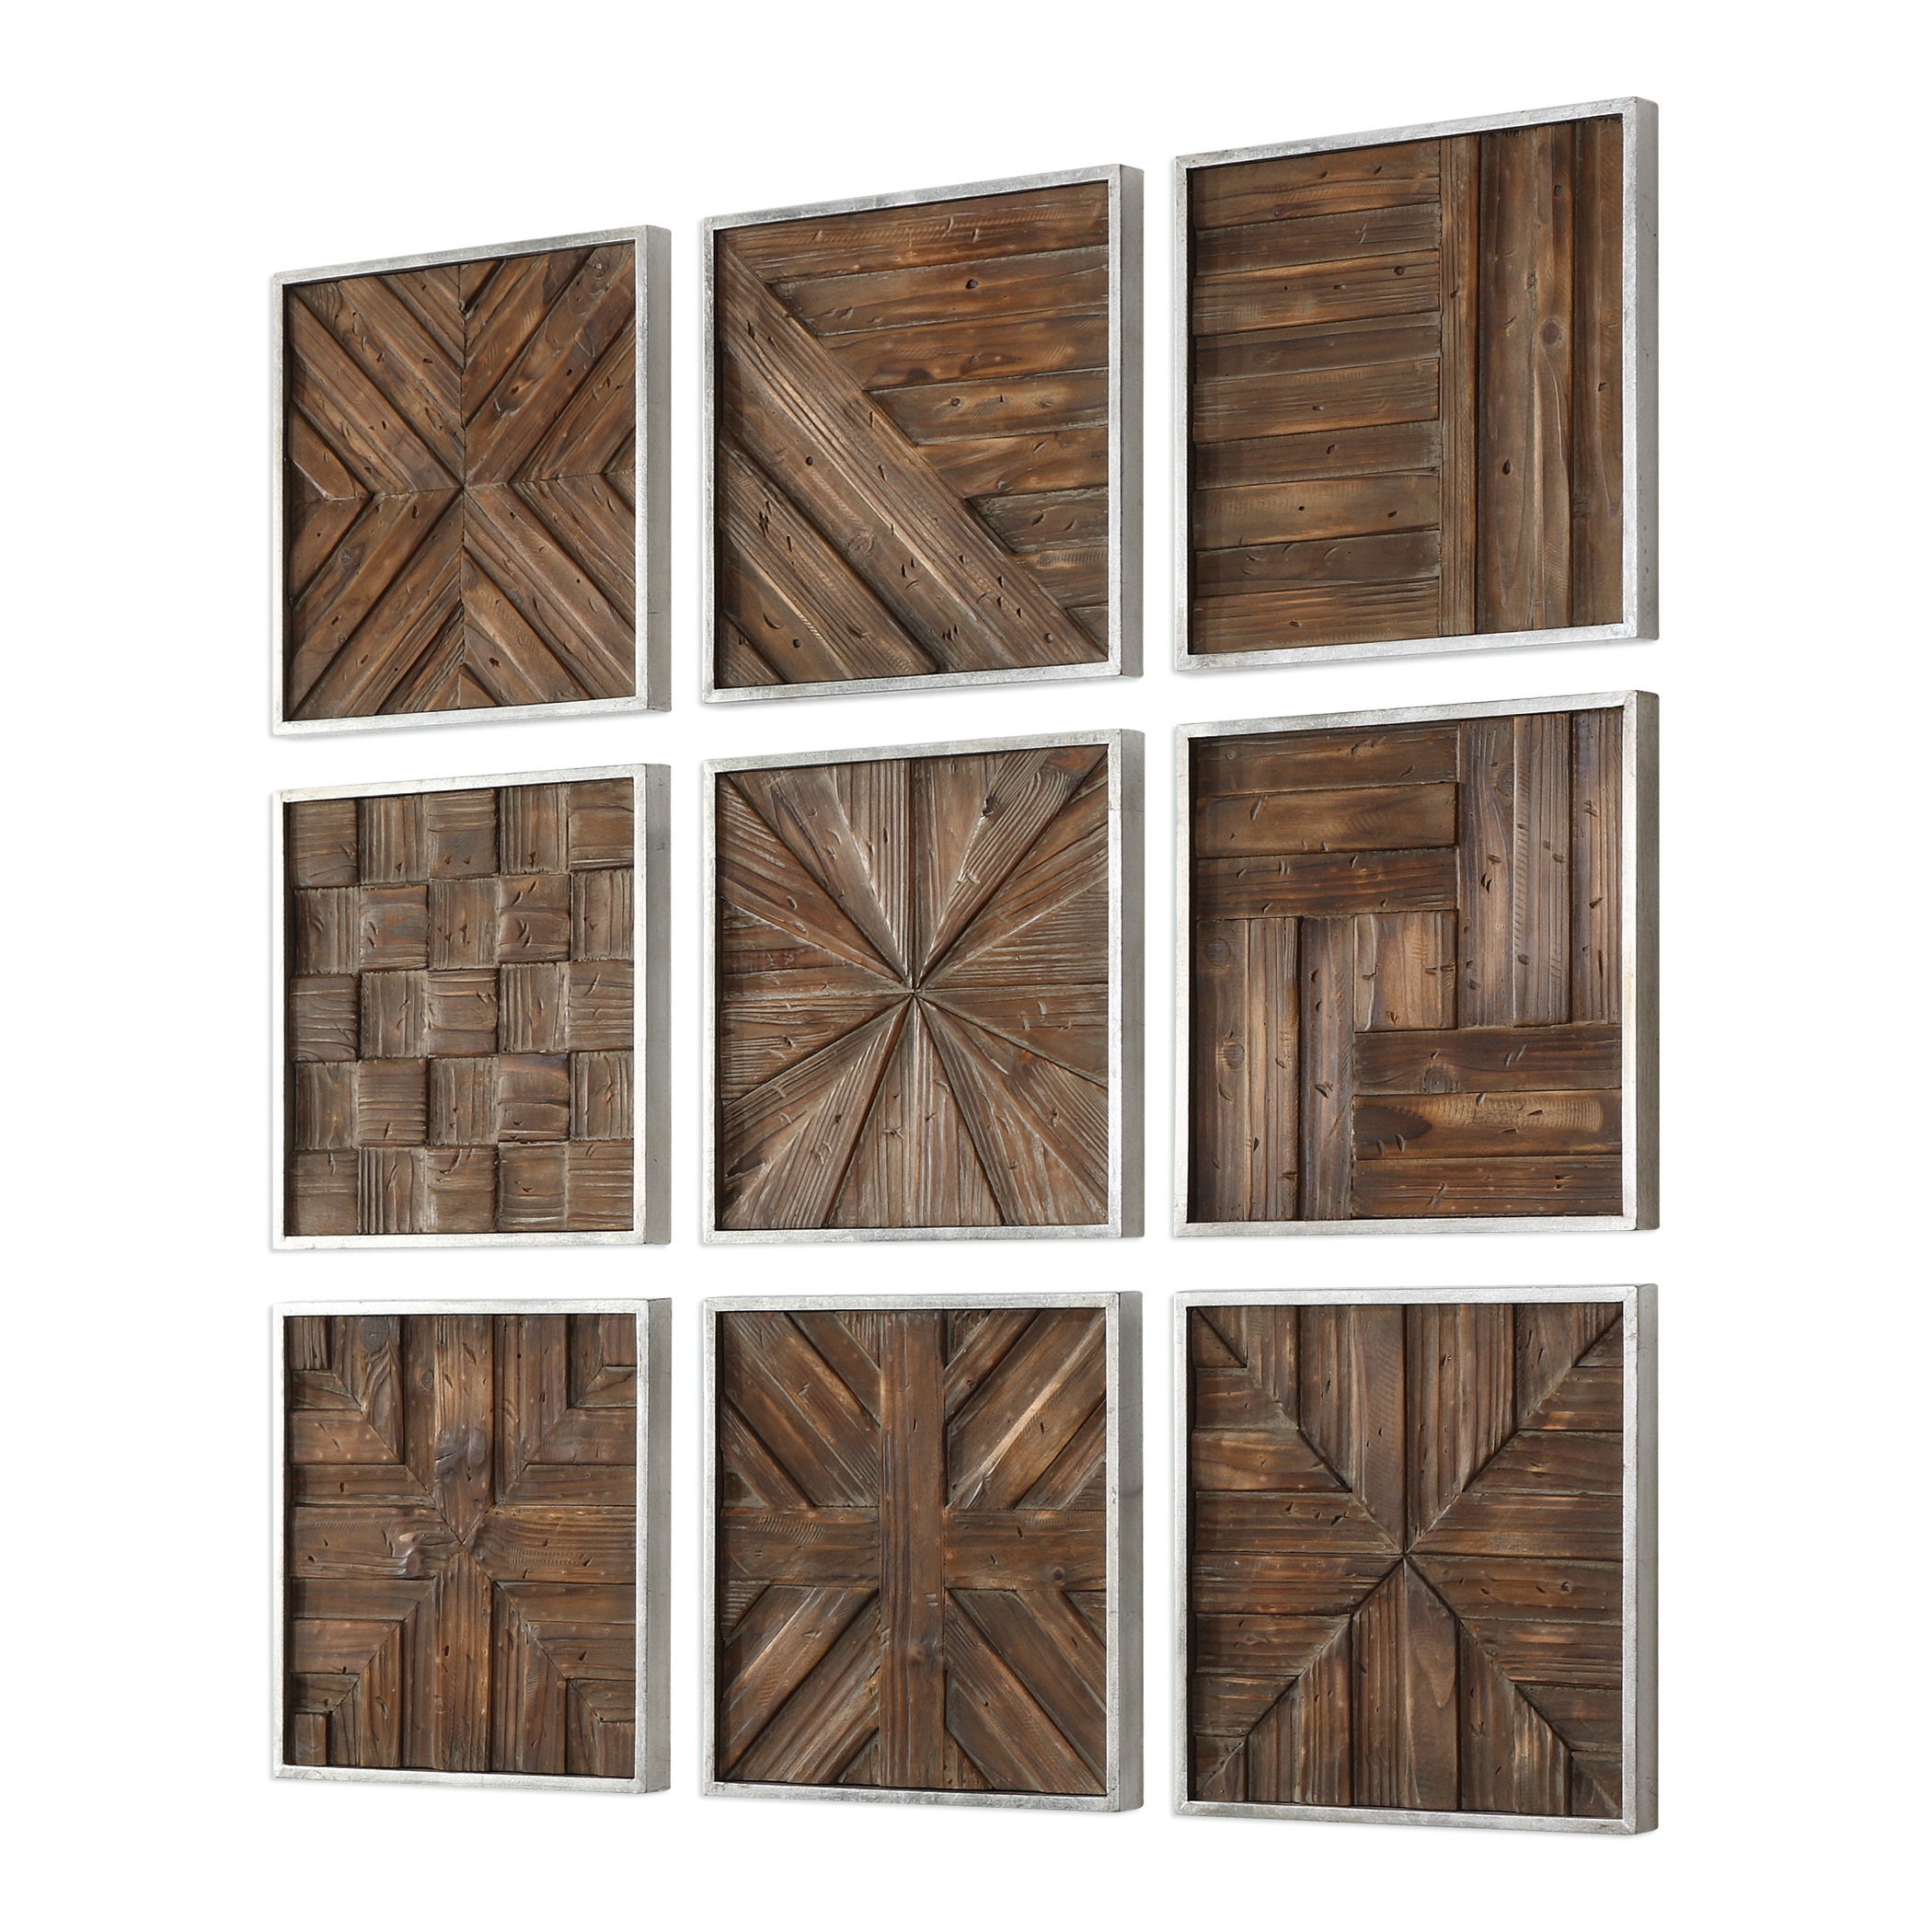 Bryndle Rustic Wooden Squares S/9 - Image 2